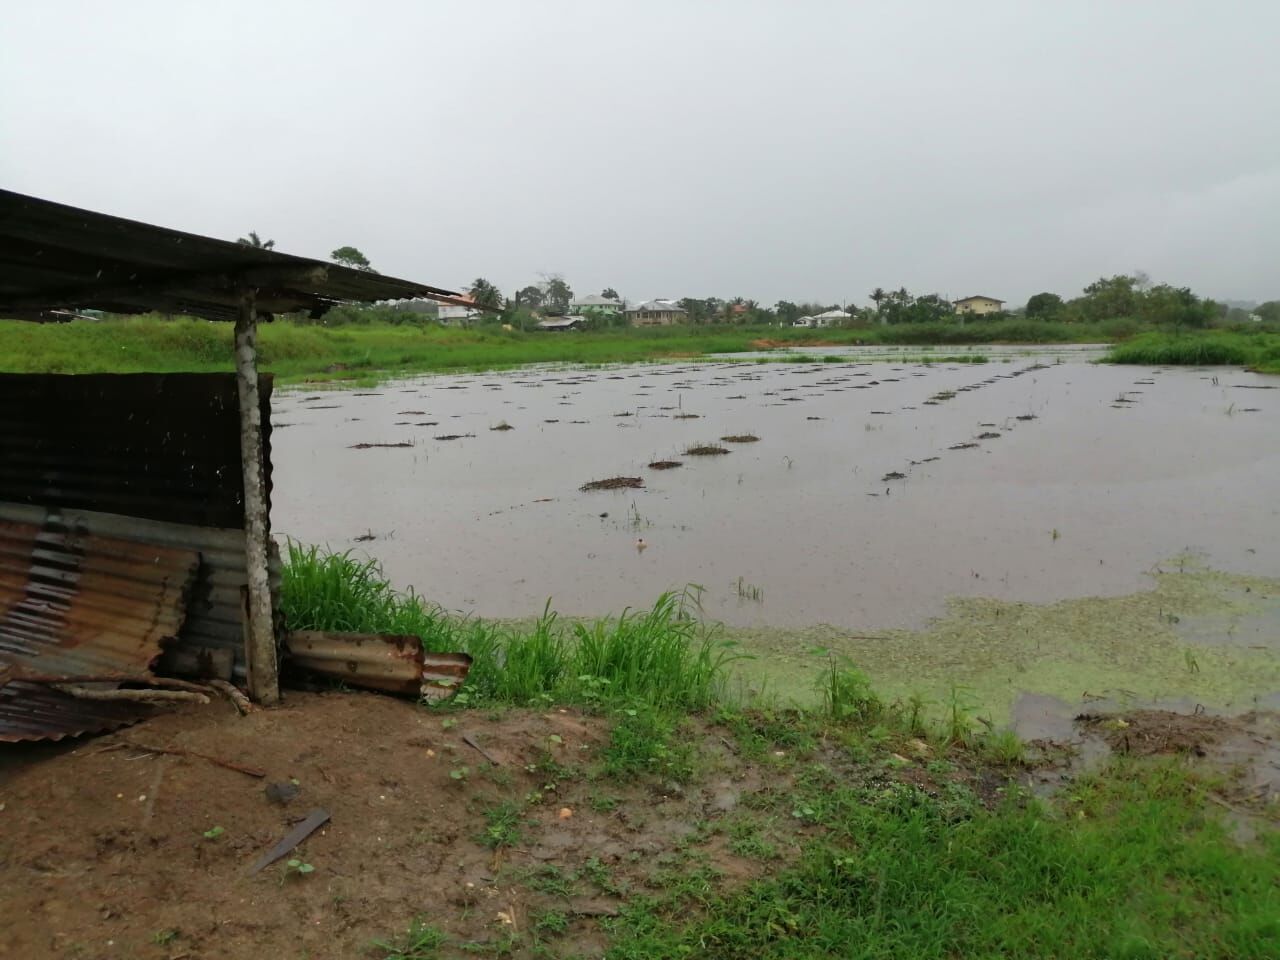 Better drainage system needed in the South Oropouche Basin